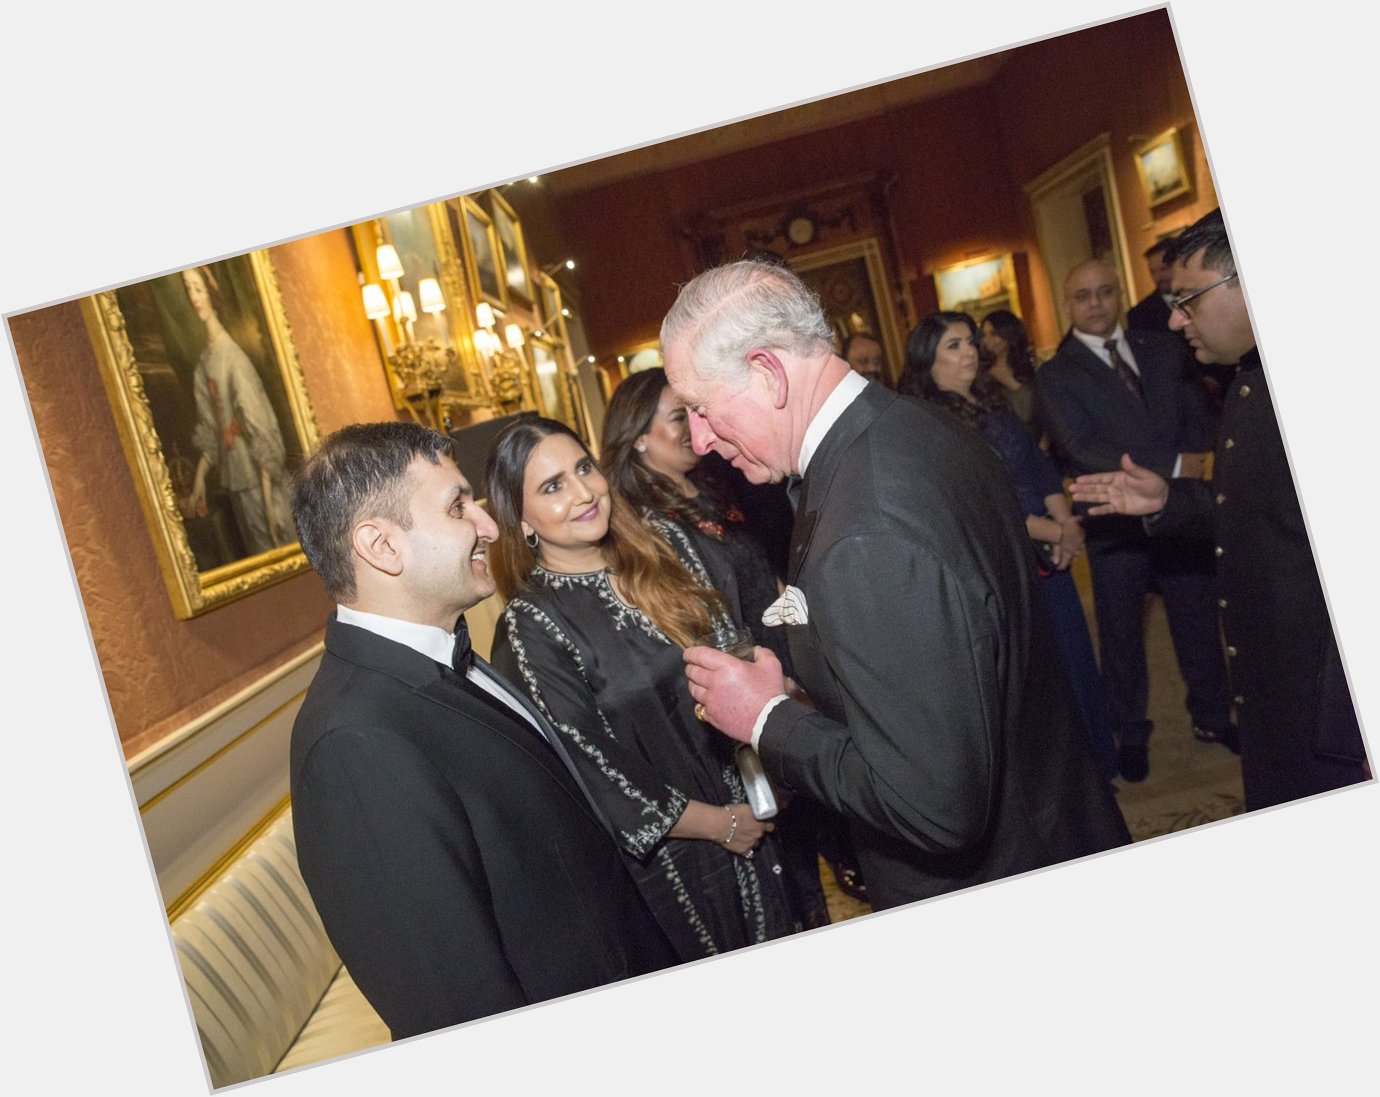 Wanted to wish HRH Prince Charles a very happy birthday today. I am a patron of his charity . 